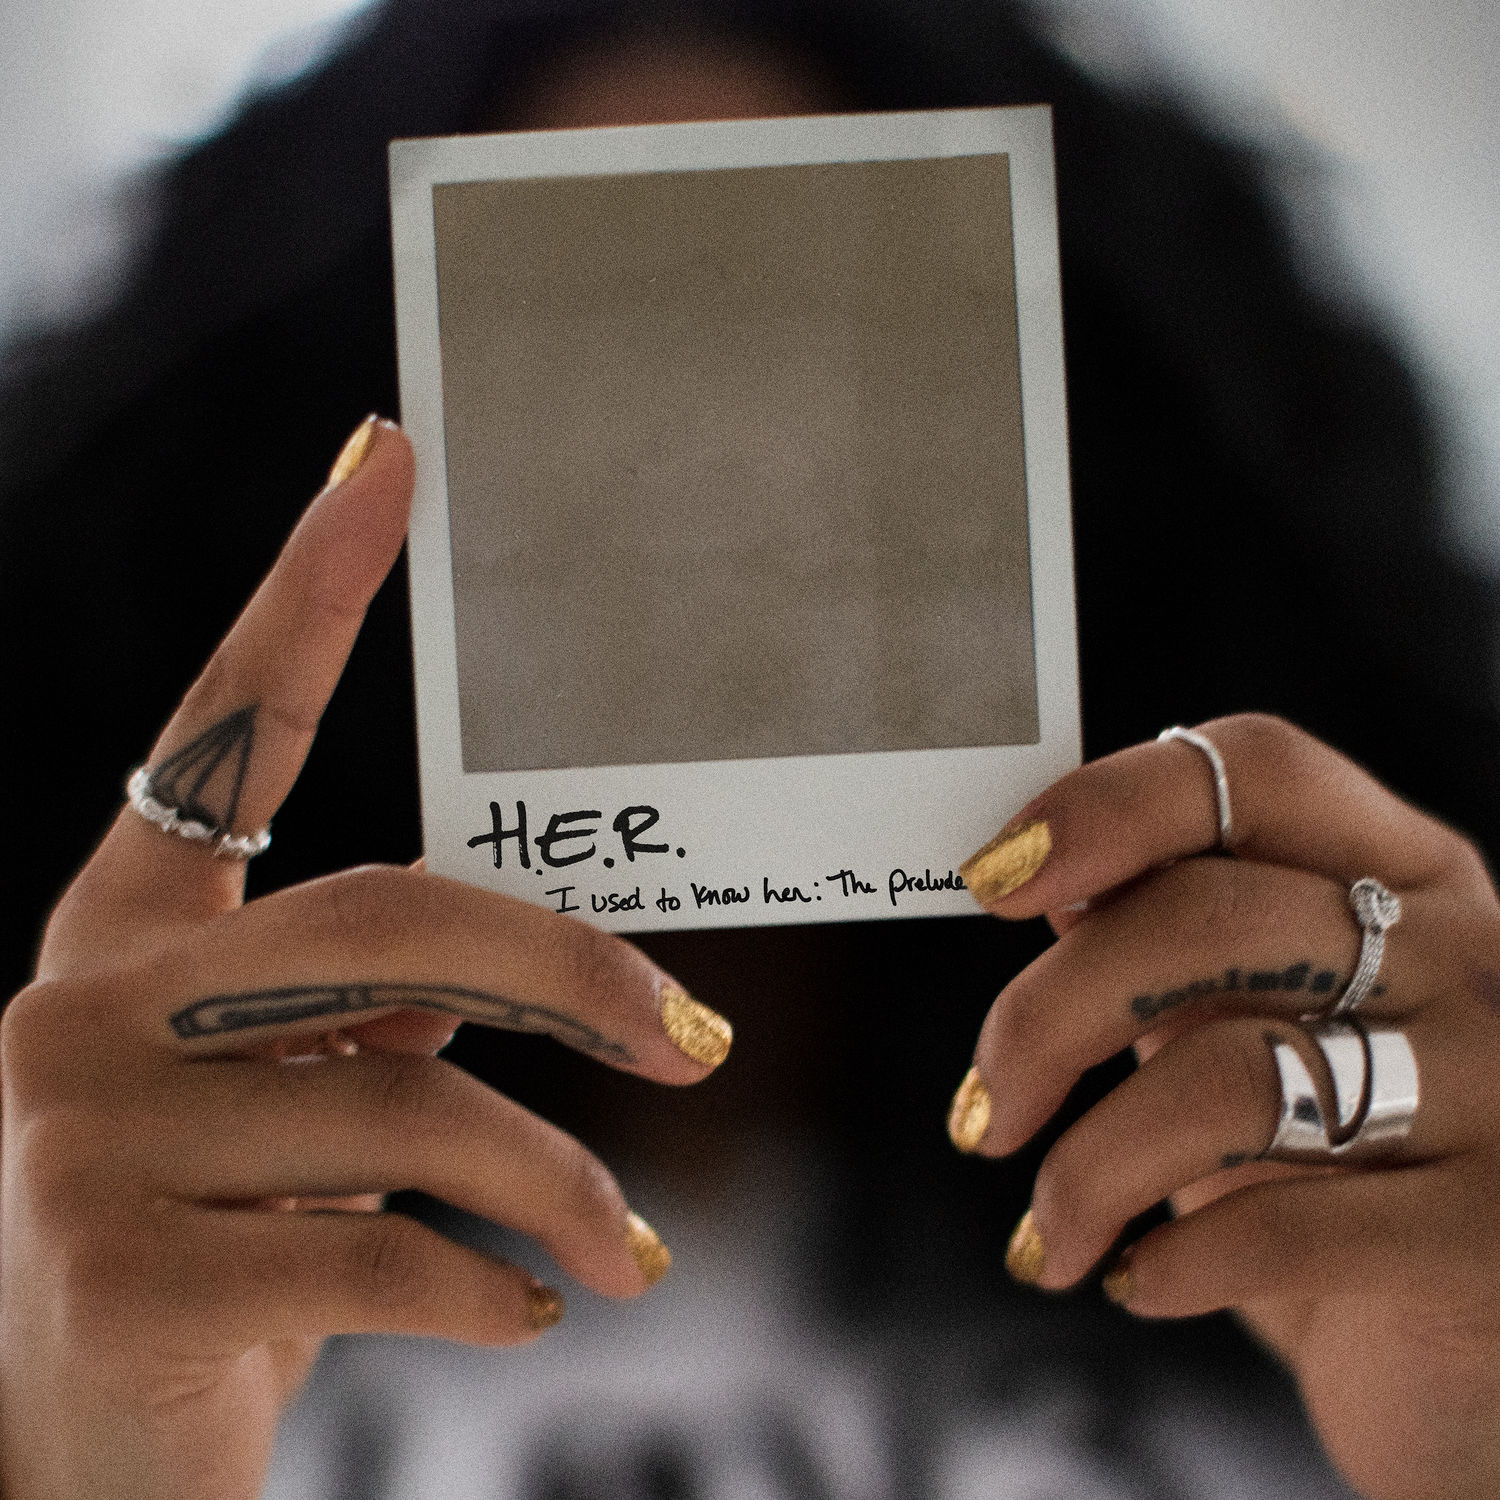 Art for As I Am by H.E.R.